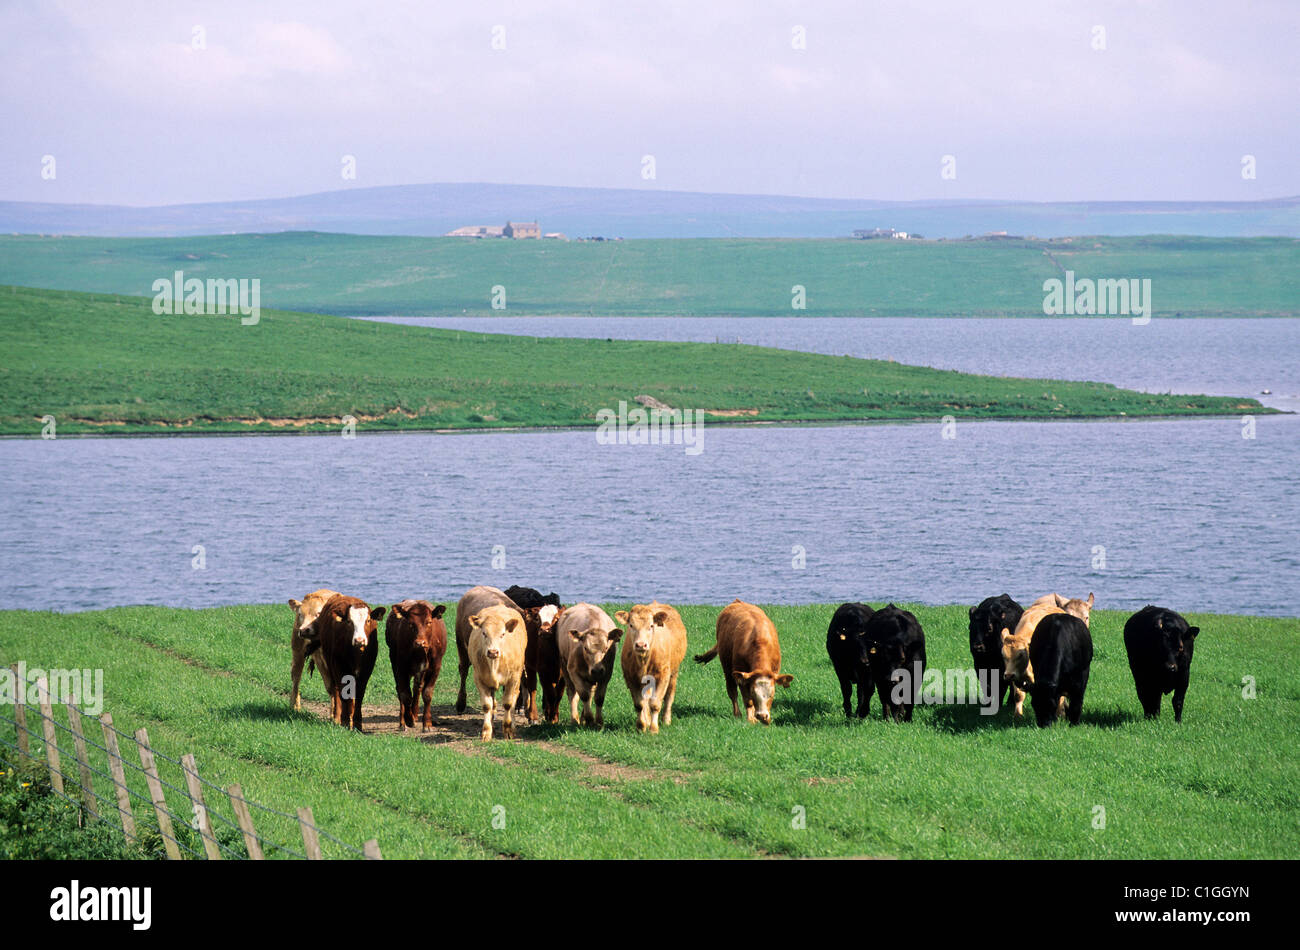 United Kingdom, Scotland, Orkney Islands, Mainland, cows in front of a loch Stock Photo